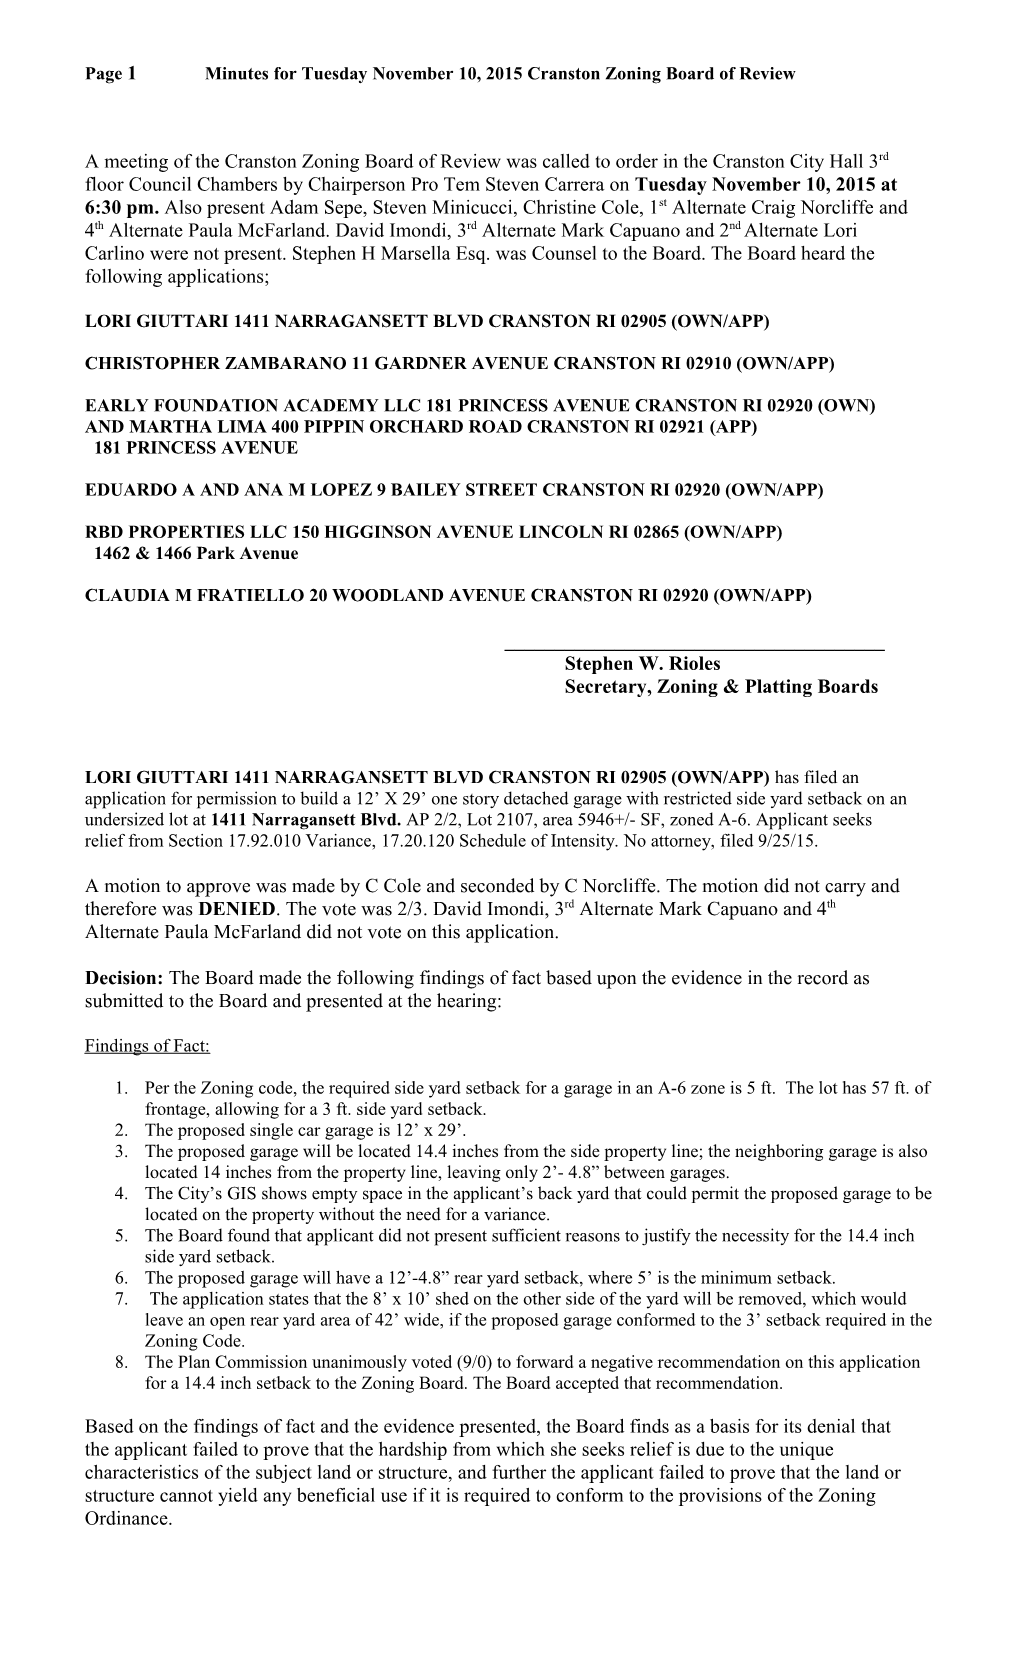 Page 1Minutes for Tuesdaynovember 10, 2015Cranston Zoning Board of Review